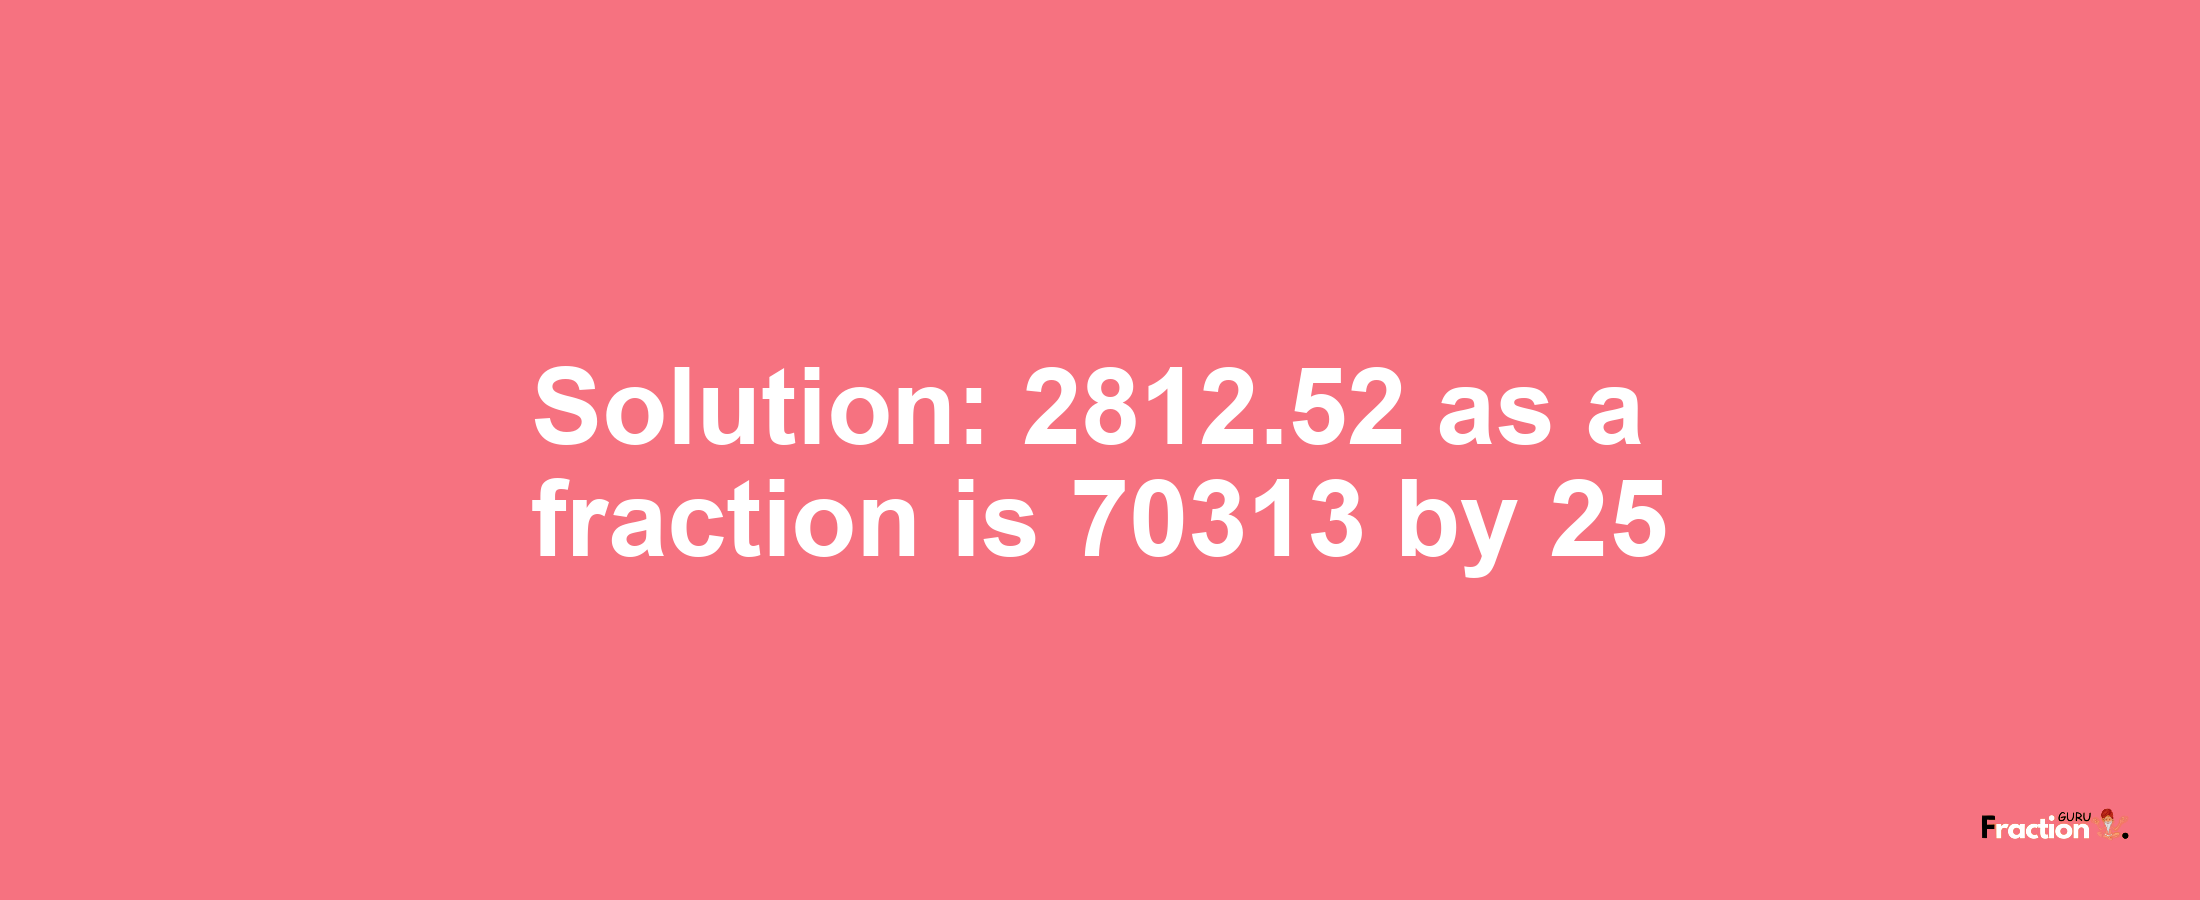 Solution:2812.52 as a fraction is 70313/25